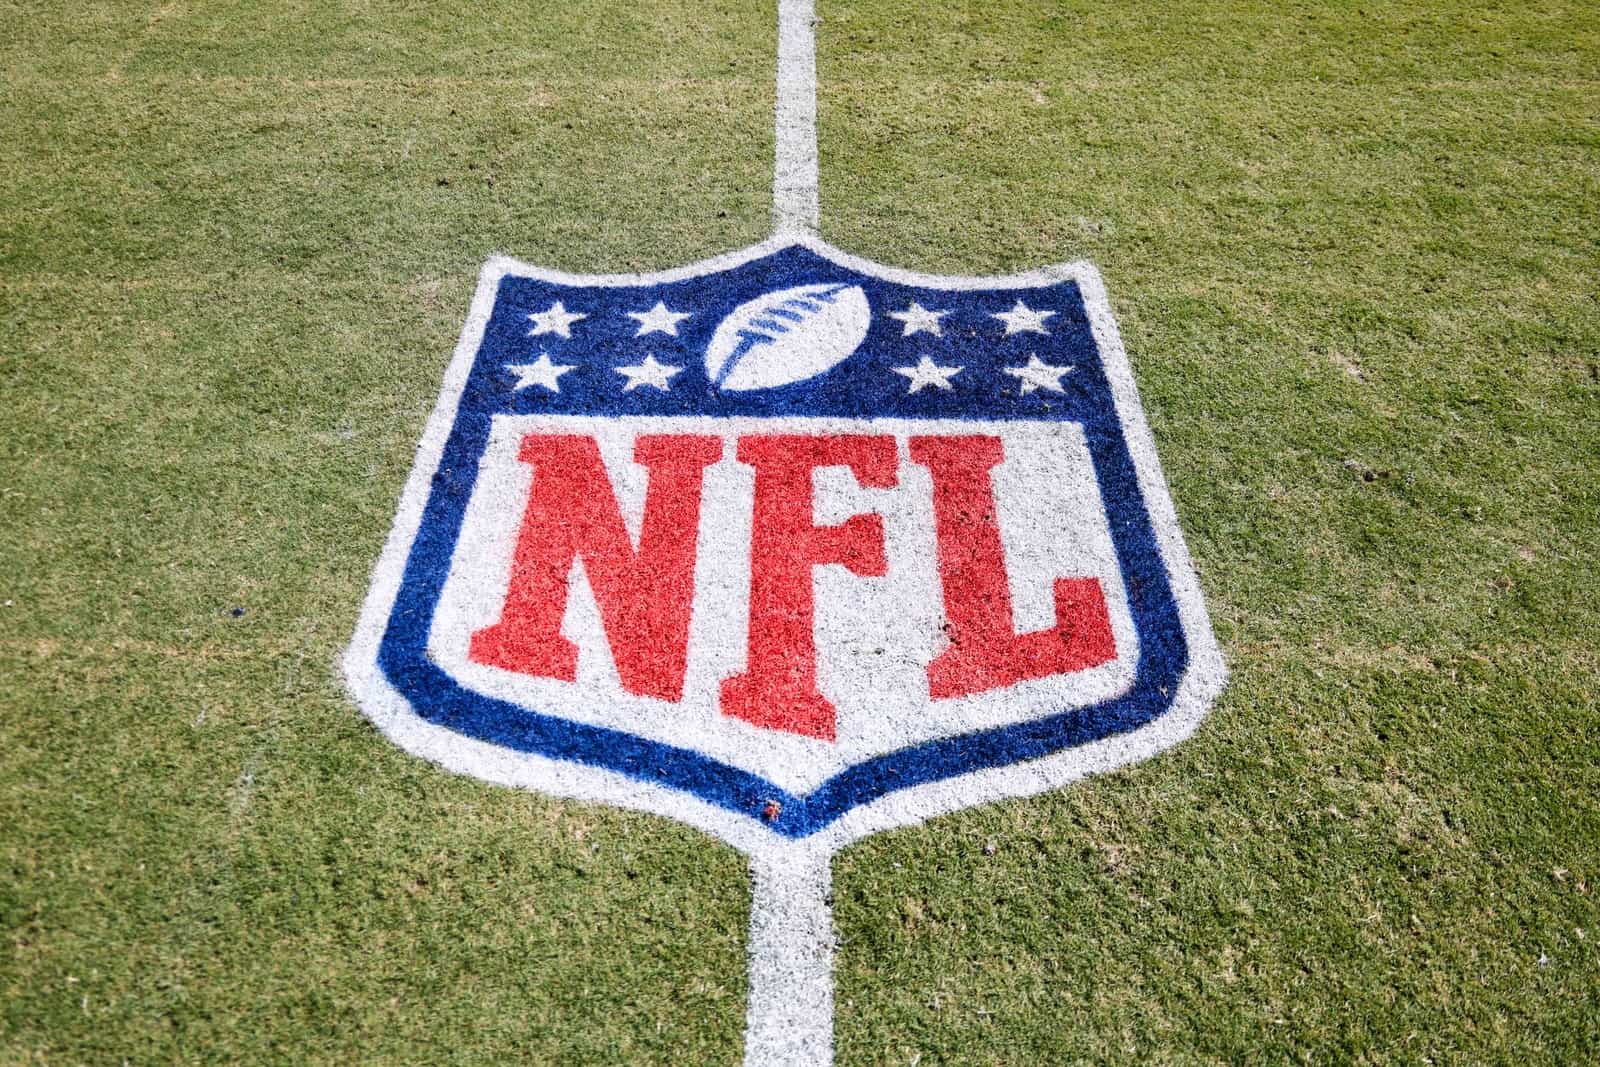 What NFL Playoff Football Games Are on TV Today, Jan. 22?